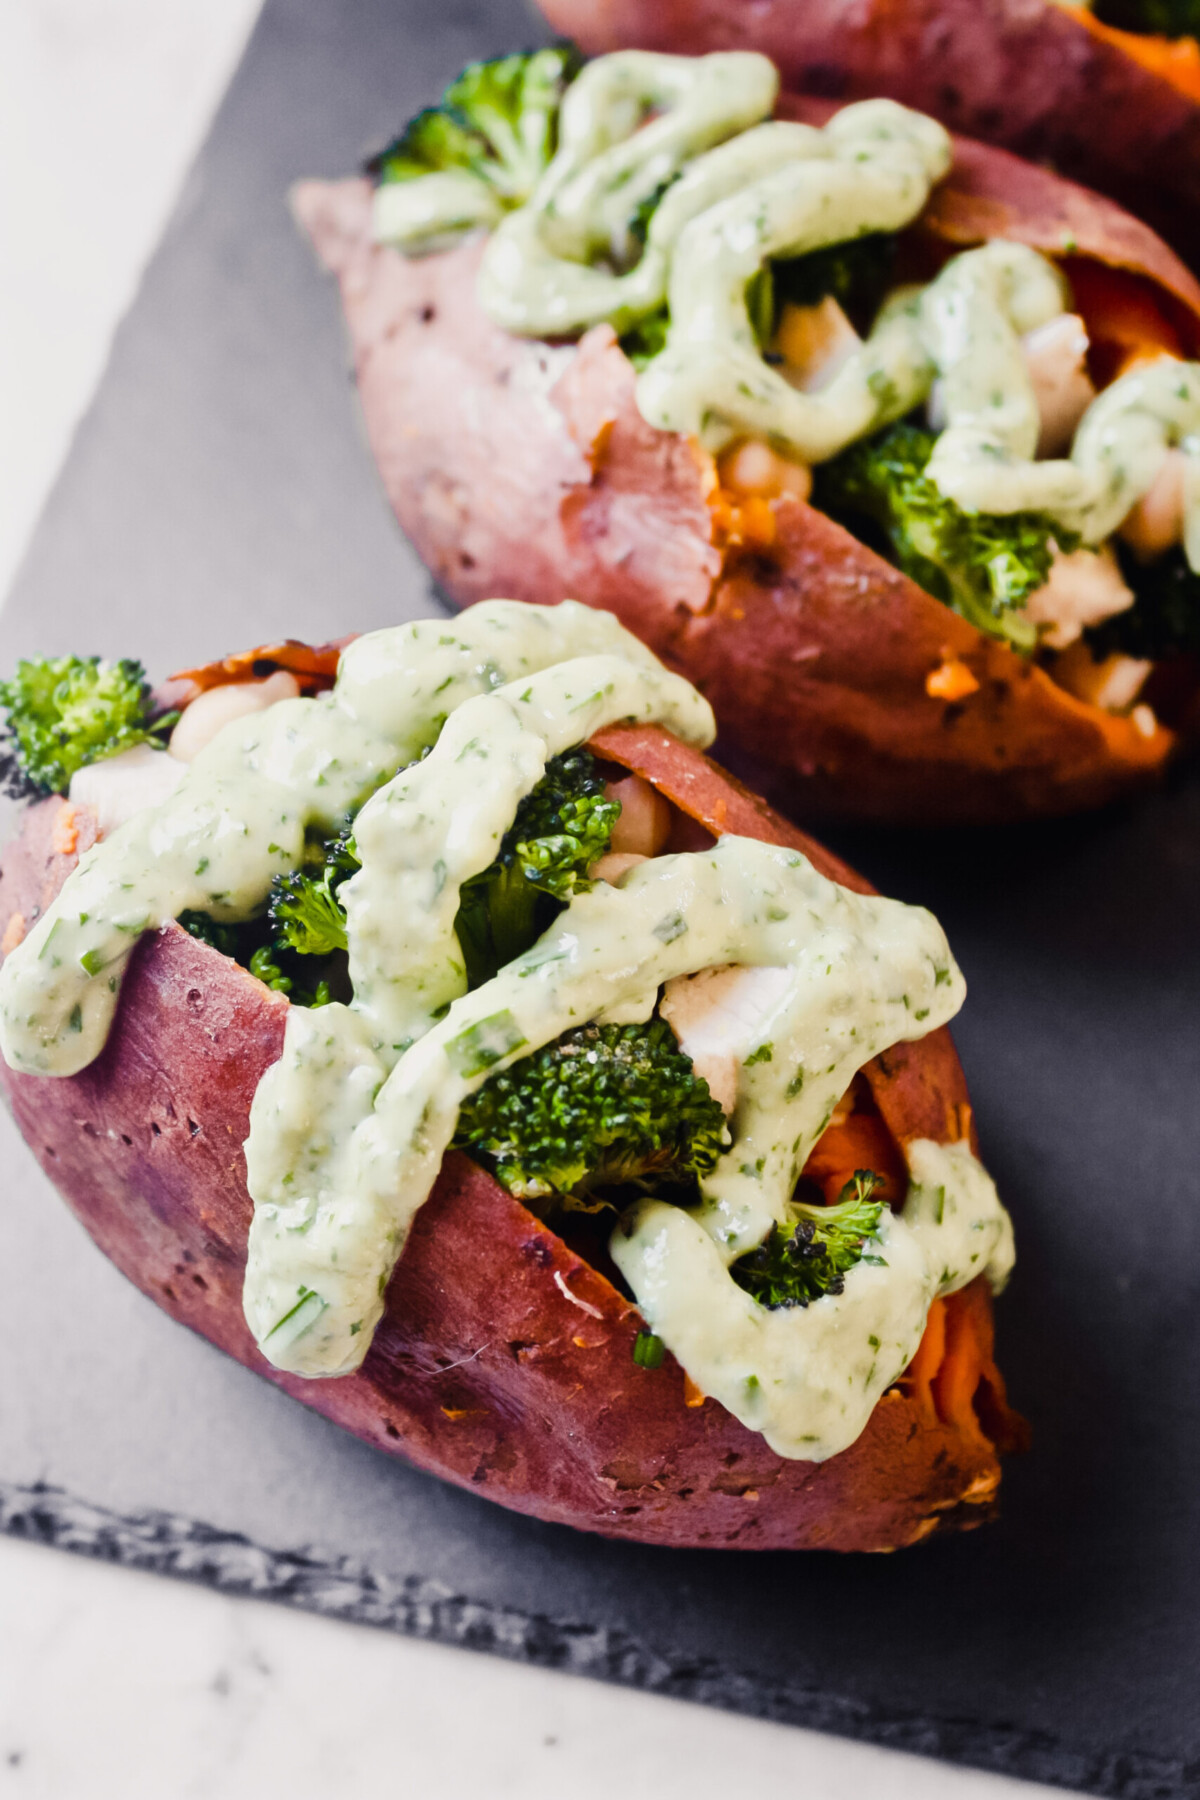  photograph of stuffed sweet potatoes drizzled with a green goddess dressing